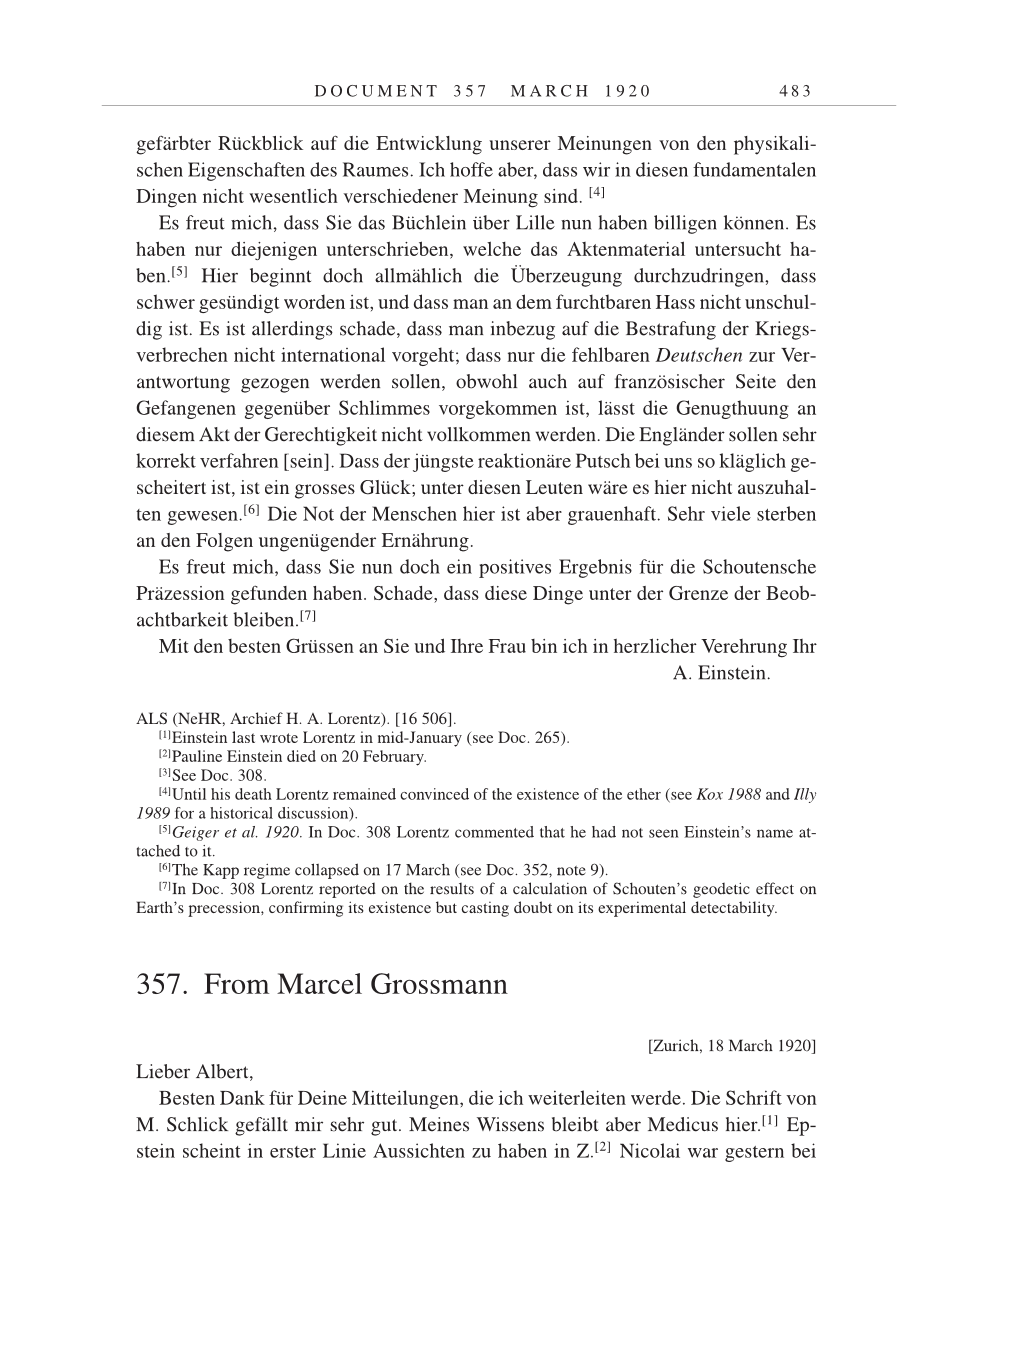 Volume 9: The Berlin Years: Correspondence January 1919-April 1920 page 483